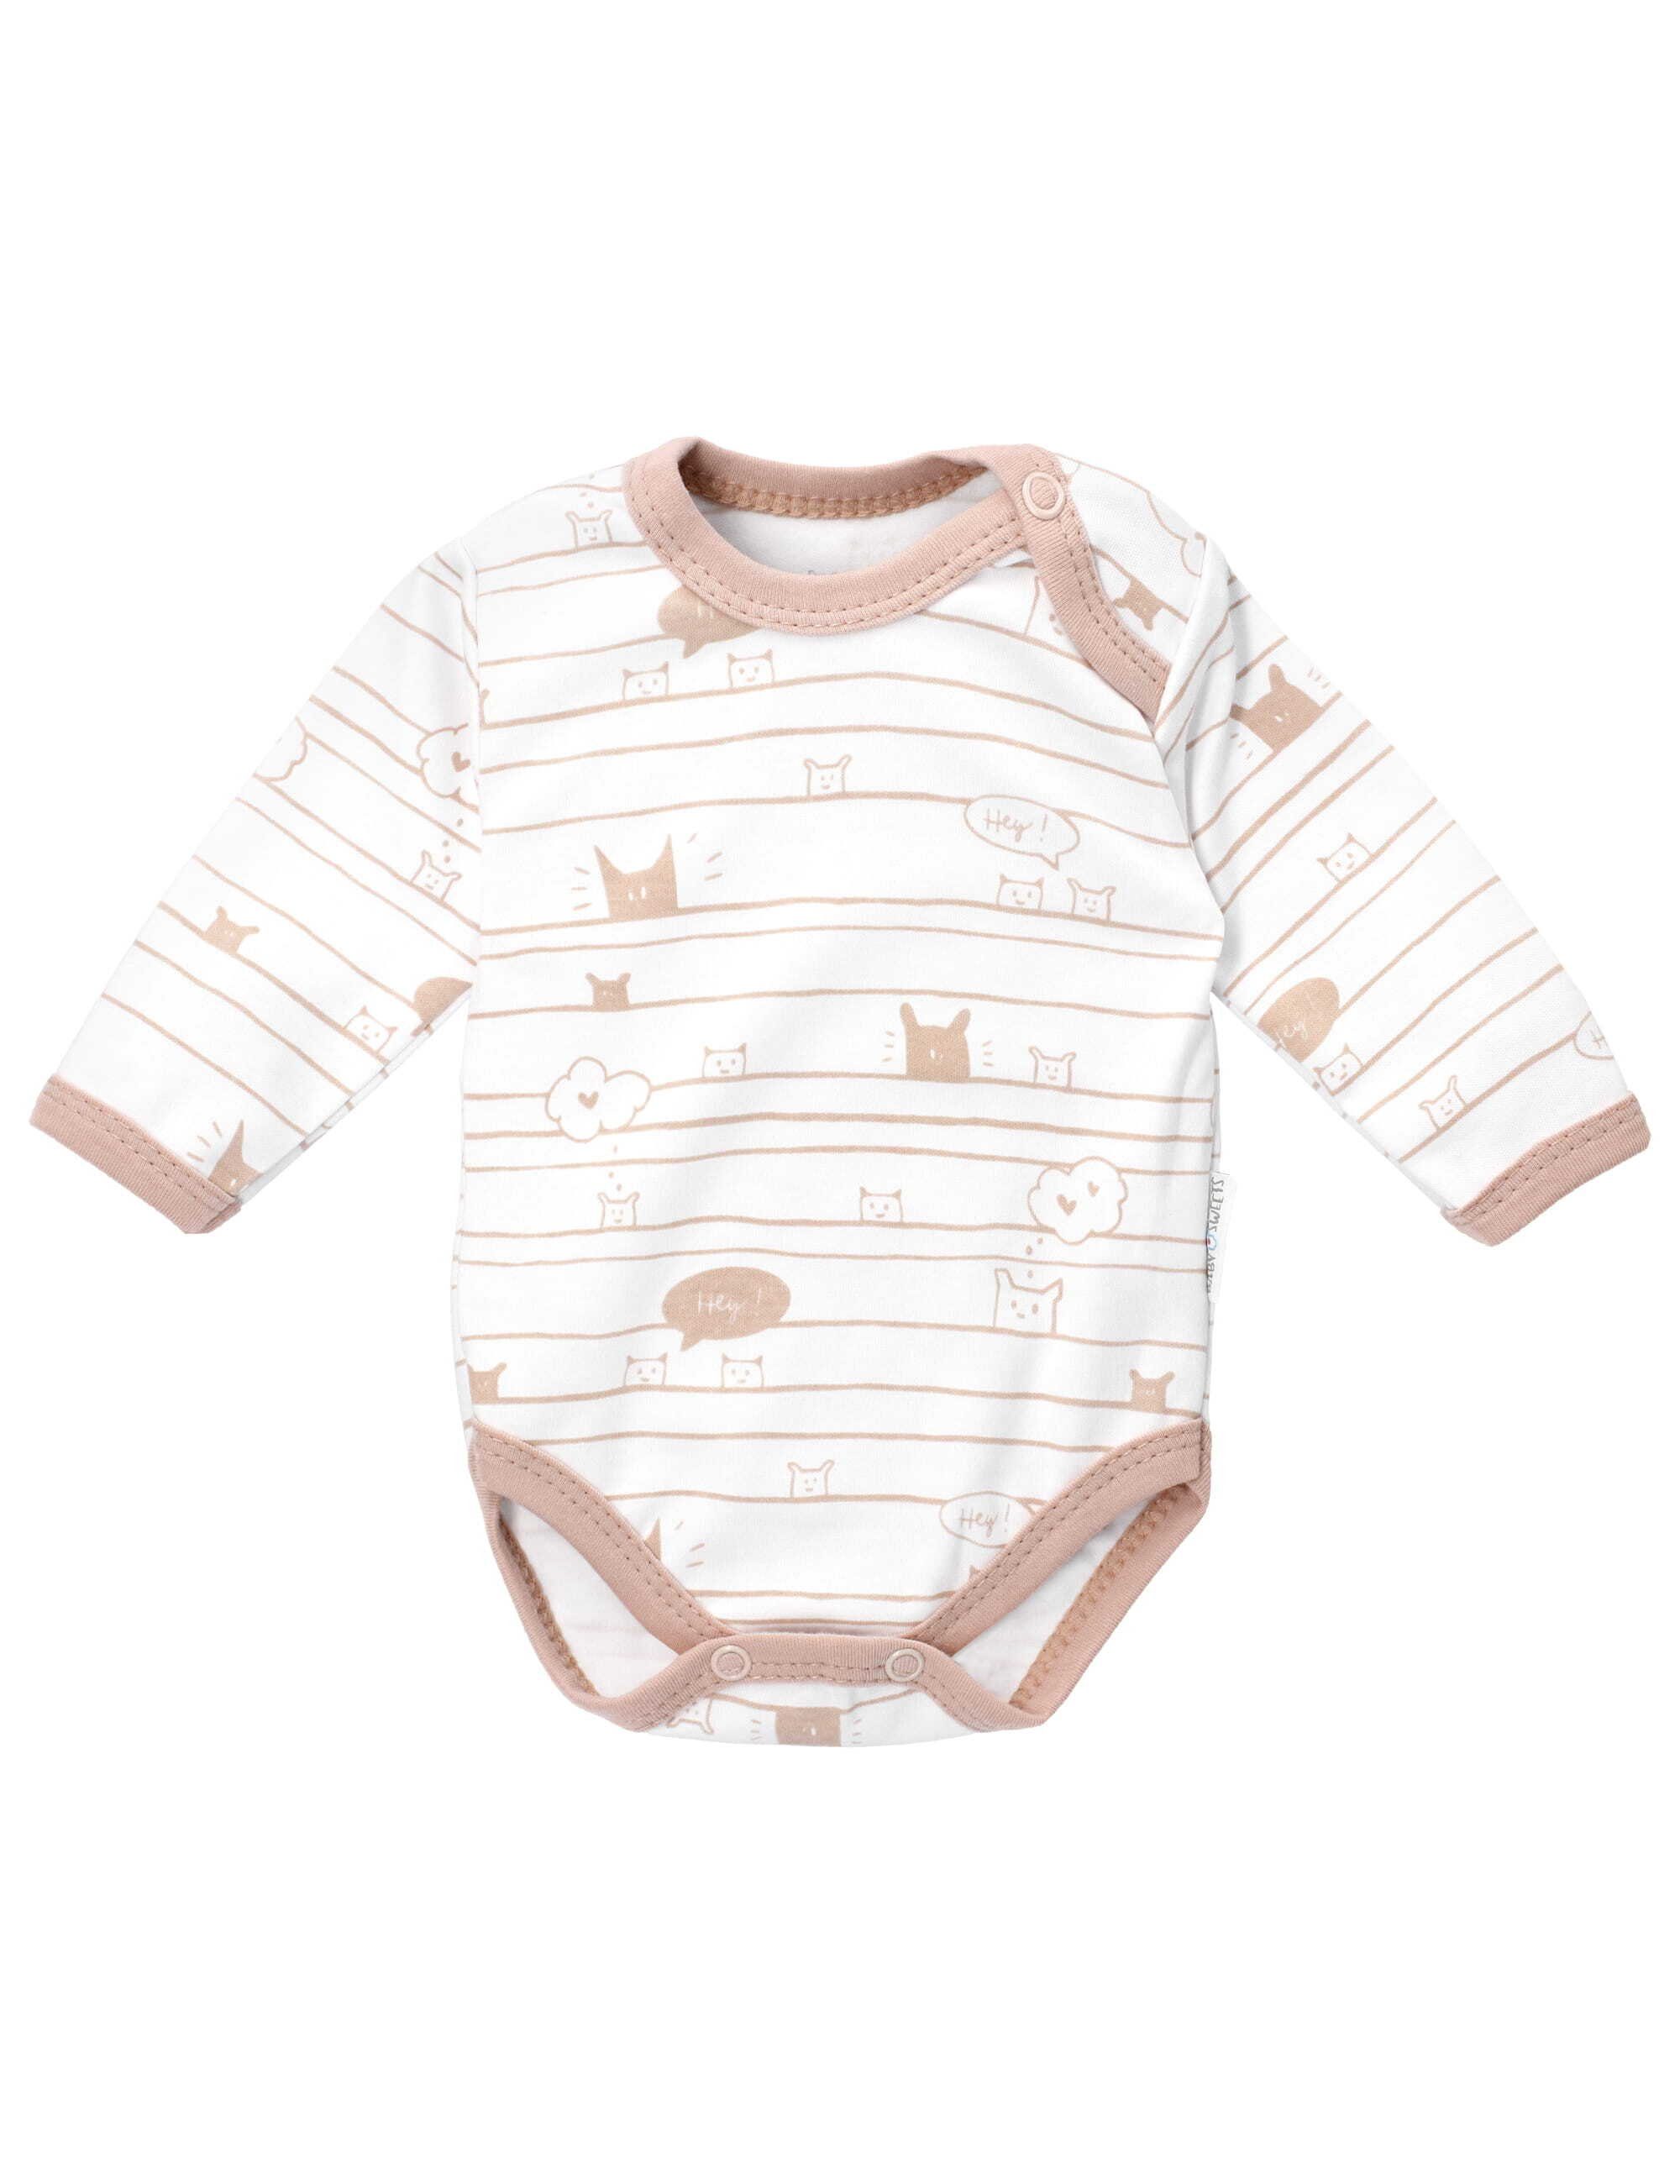 & Body Baby creme (3-tlg., Sweets Teile) Hose 3 Set beige Tiere